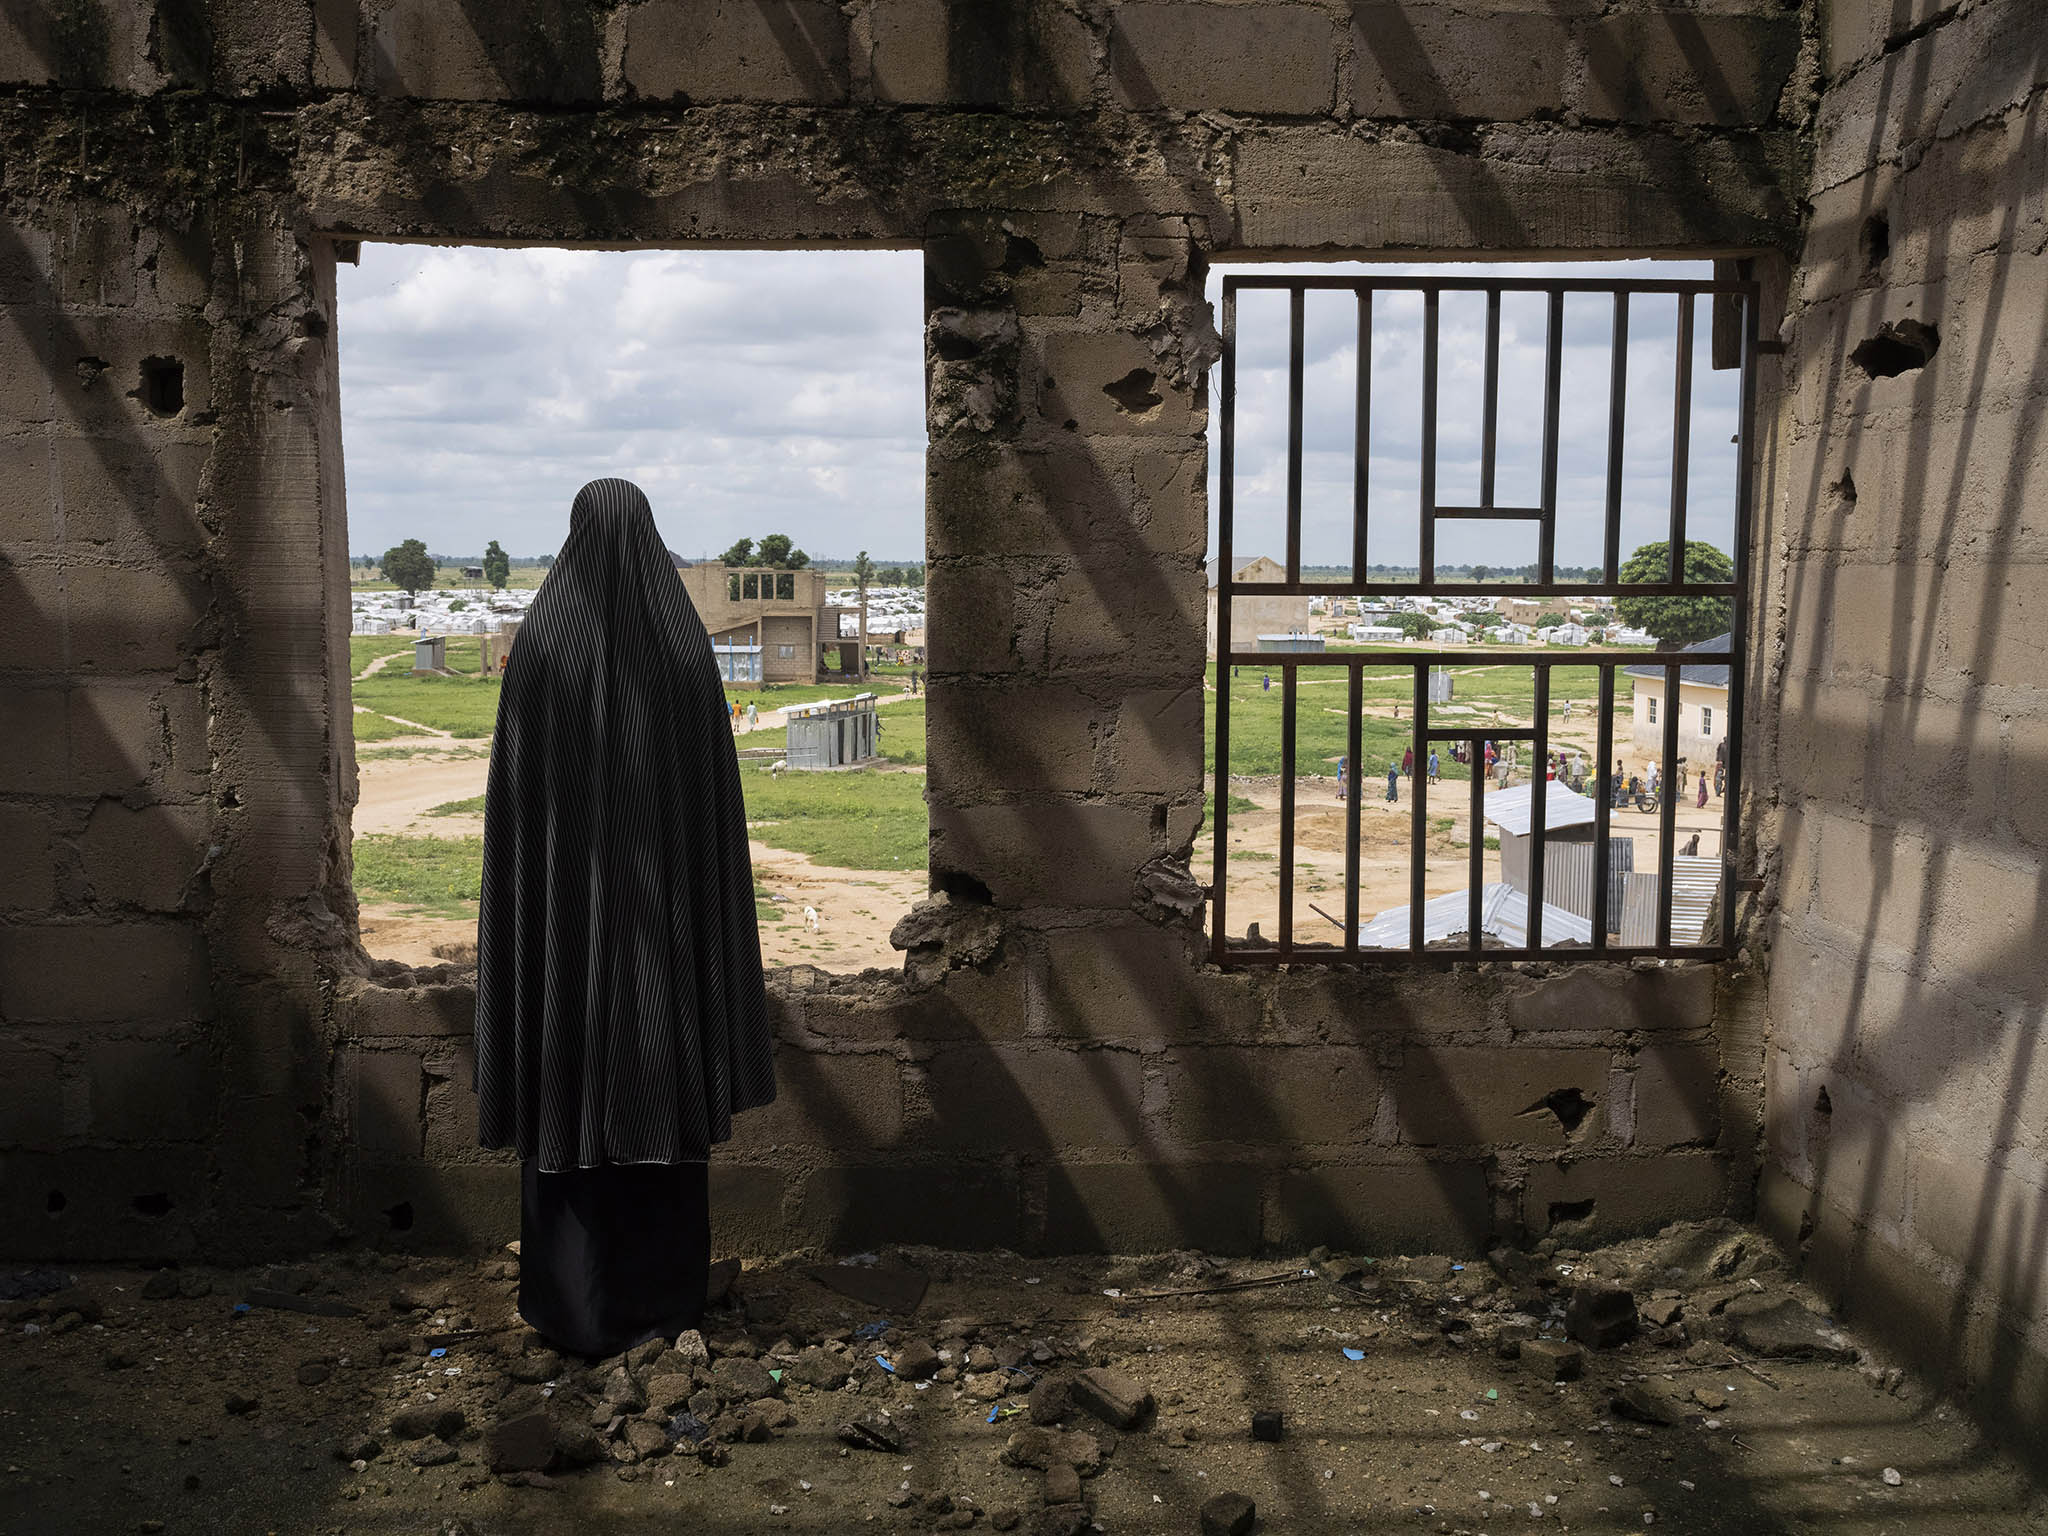 A woman who was kidnapped by Boko Haram and recruited as a bomber at an abandoned building at a camp for displaced people in Konduga, Nigeria. August 20, 2019. (Laura Boushnak/The New York Times)